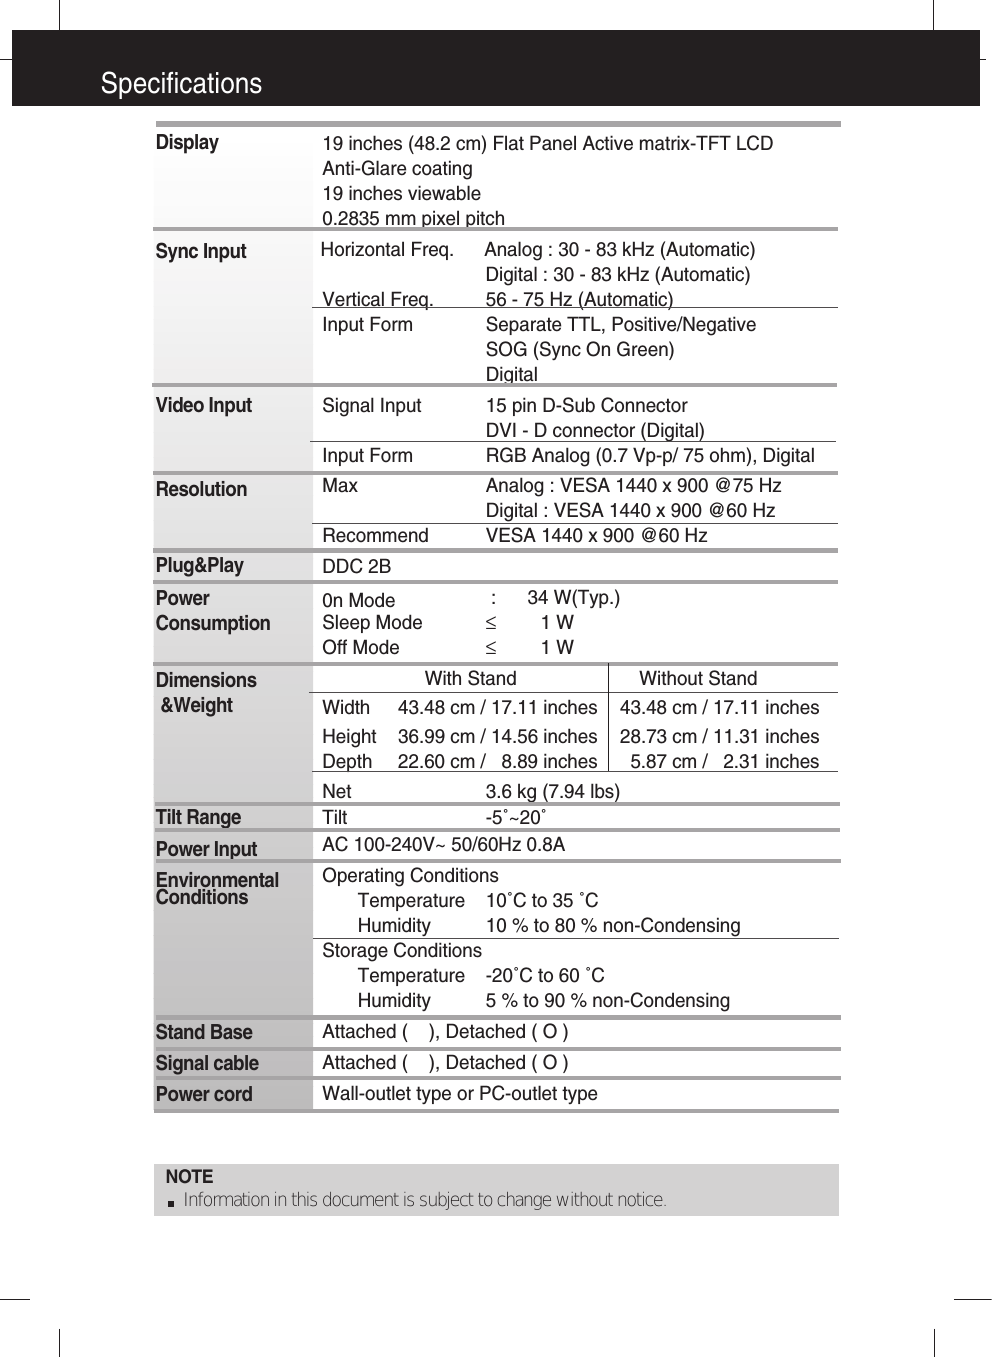 Specifications                                          NOTEInformation in this document is subject to change without notice.DisplaySync InputVideo InputResolutionPlug&amp;PlayPowerConsumptionDimensions&amp;WeightTilt RangePower InputEnvironmentalConditionsStand Base Signal cablePower cord 19 inches (48.2 cm) Flat Panel Active matrix-TFT LCD Anti-Glare coating19 inches viewable0.2835 mm pixel pitchHorizontal Freq. Analog : 30 - 83 kHz (Automatic)Digital : 30 - 83 kHz (Automatic)Vertical Freq. 56 - 75 Hz (Automatic)Input Form Separate TTL, Positive/NegativeSOG (Sync On Green) DigitalSignal Input 15 pin D-Sub ConnectorDVI - D connector (Digital)Input Form RGB Analog (0.7 Vp-p/ 75 ohm), DigitalMax Analog : VESA 1440 x 900 @75 HzDigital : VESA 1440 x 900 @60 HzRecommend VESA 1440 x 900 @60 HzDDC 2B0n Mode : 34 W(Typ.)Sleep Mode ≤1 WOff Mode ≤1 WWith Stand Without StandWidth 43.48 cm / 17.11 inches 43.48 cm / 17.11 inchesHeight 36.99 cm / 14.56 inches 28.73 cm / 11.31 inchesDepth 22.60 cm /   8.89 inches 5.87 cm /   2.31 inchesNet 3.6 kg (7.94 lbs)Tilt -5˚~20˚AC 100-240V~ 50/60Hz 0.8A Operating ConditionsTemperature 10˚C to 35 ˚CHumidity 10 % to 80 % non-CondensingStorage ConditionsTemperature -20˚C to 60 ˚CHumidity 5 % to 90 % non-CondensingAttached (    ), Detached ( O )Attached (    ), Detached ( O )Wall-outlet type or PC-outlet type